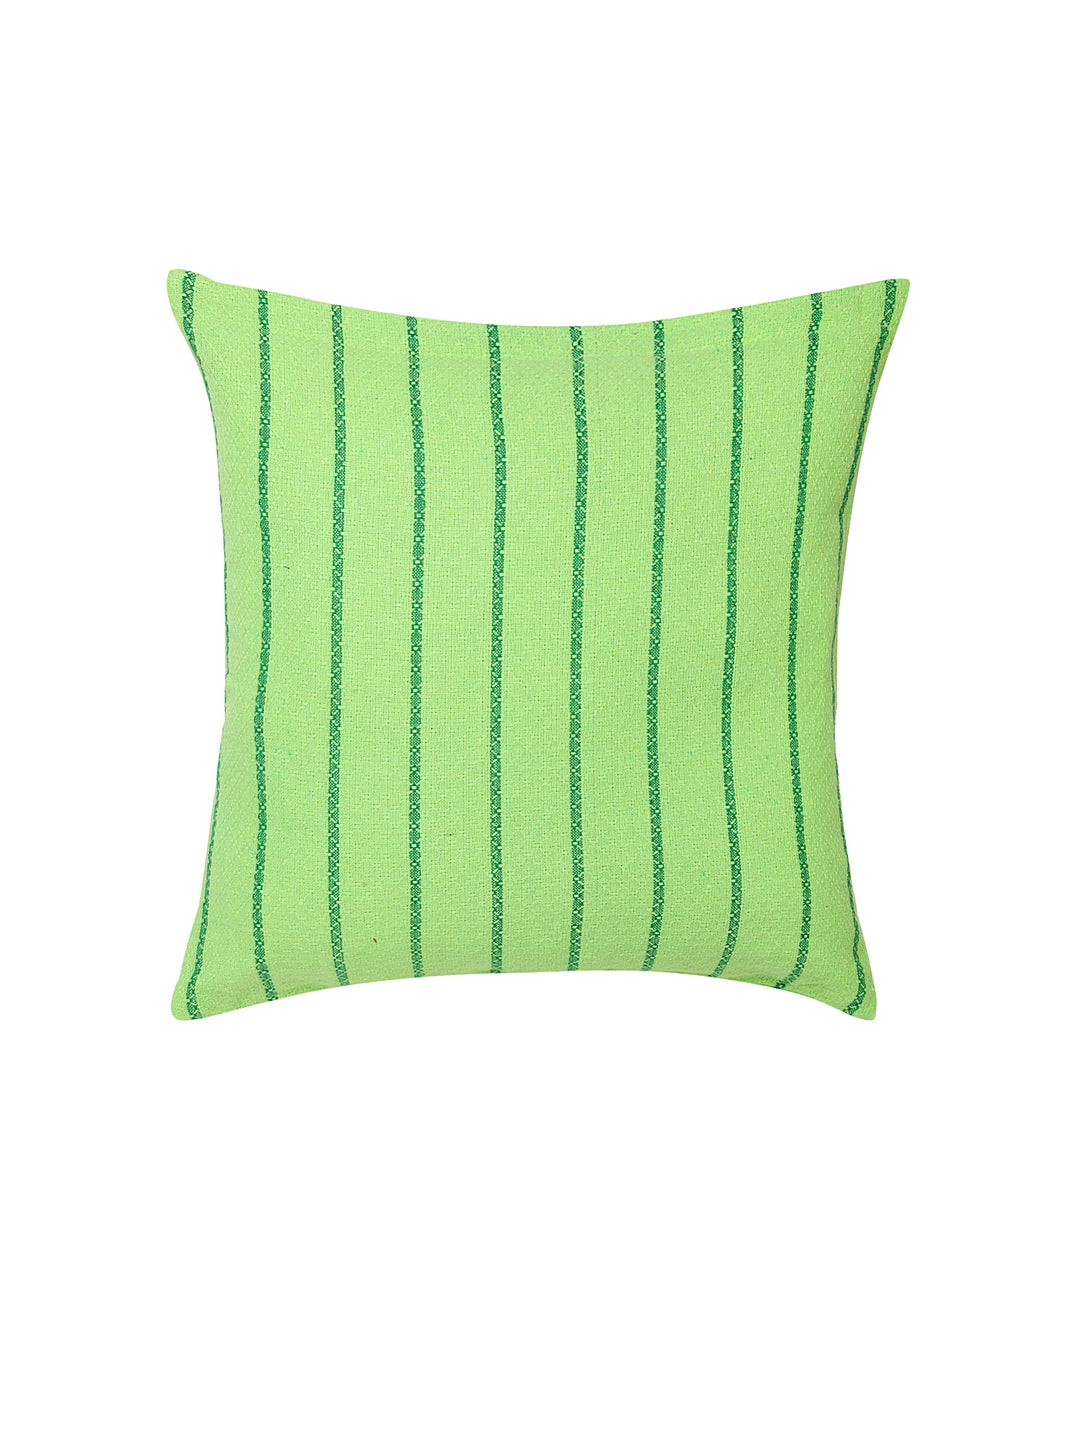 KLOTTHE Set of Five ParrotGreen Cotton Striped Cushion Covers